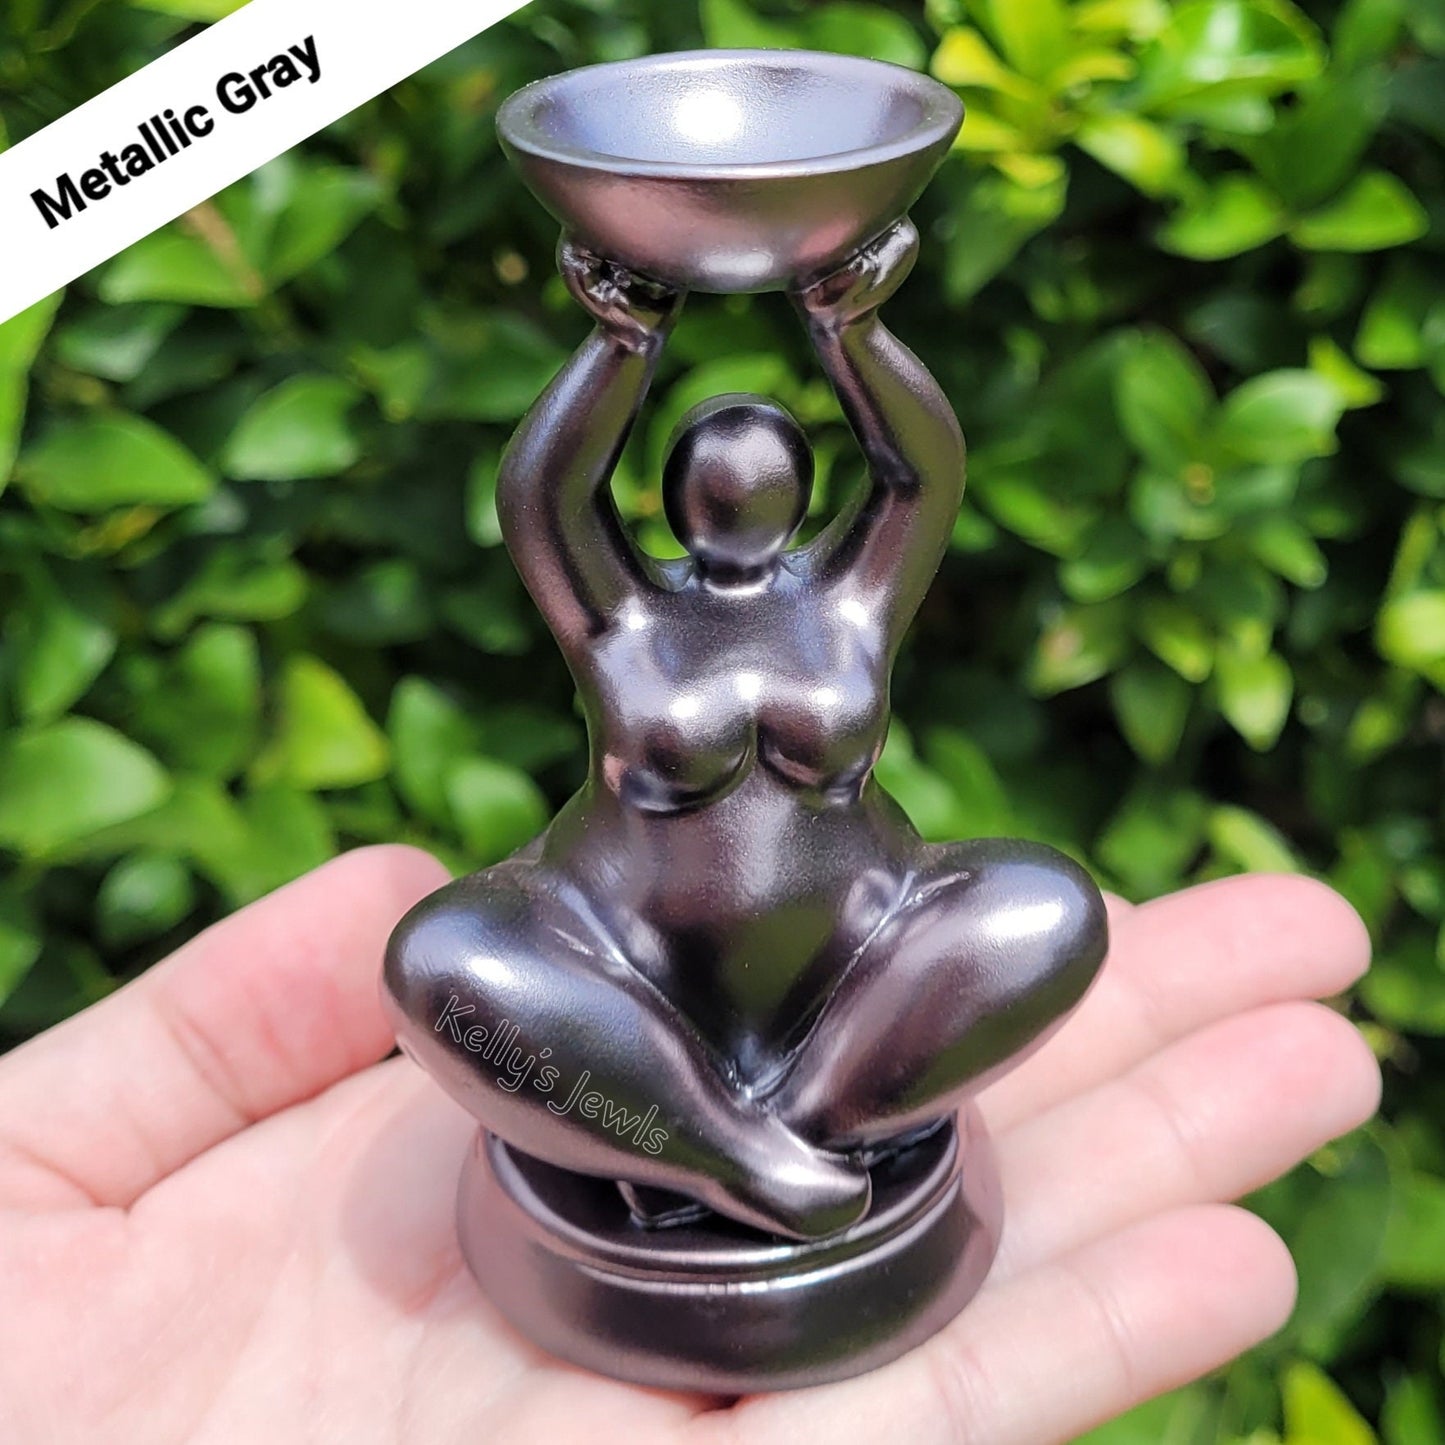 Woman Goddess Sphere Display Stand for Crystal Balls or Eggs 2" to 4" (51mm to 102mm)